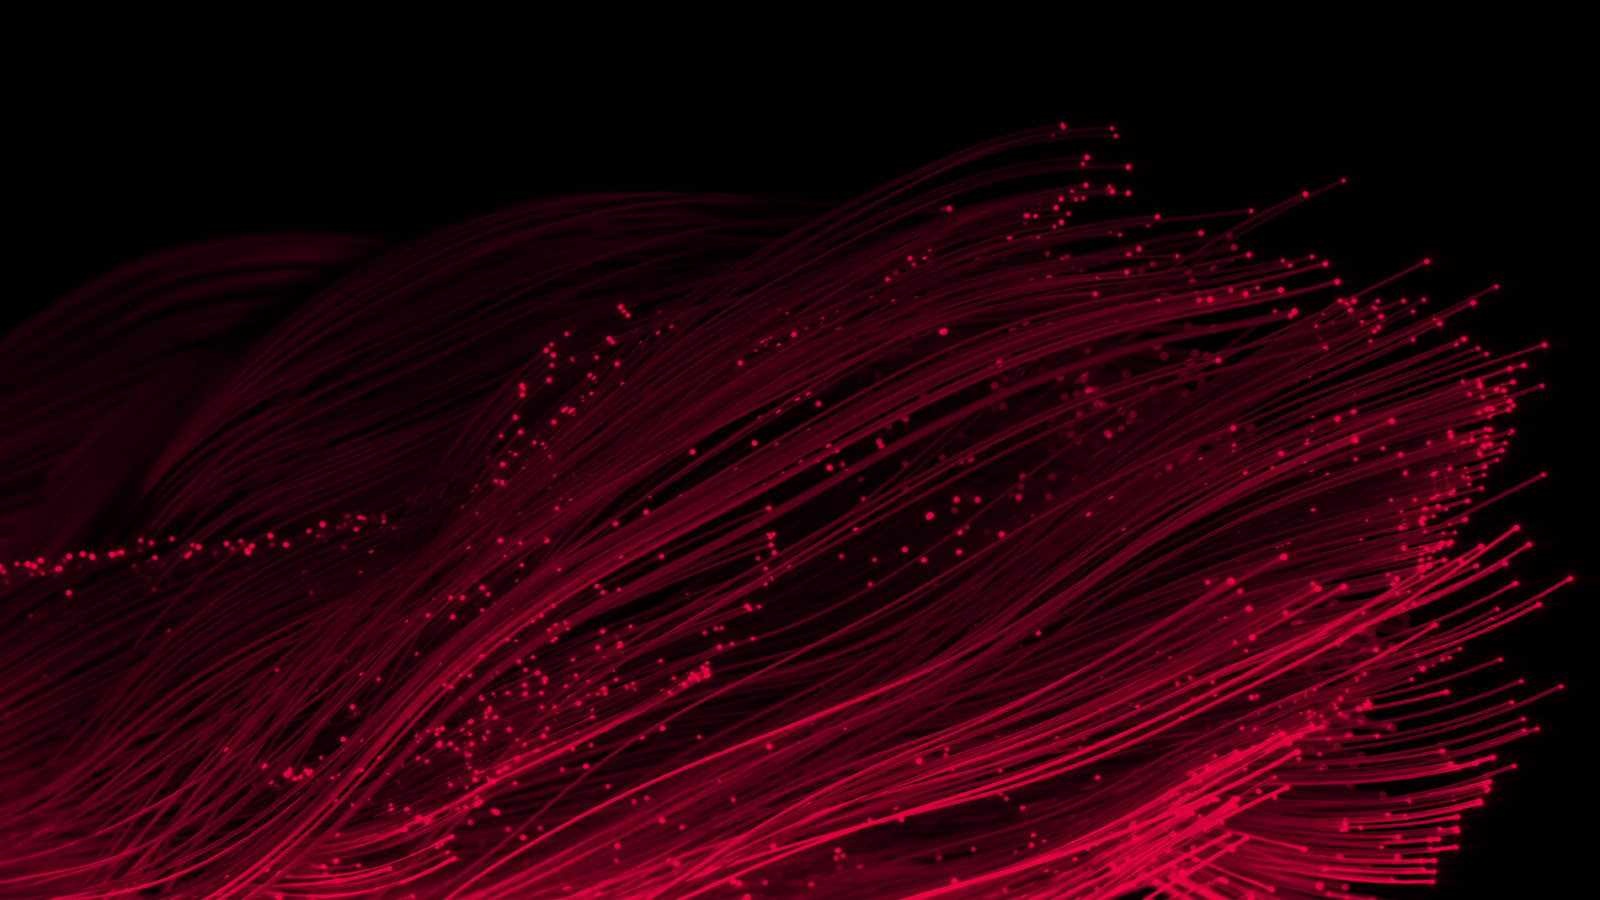 Dark red background with brighter red fiber optic light wires